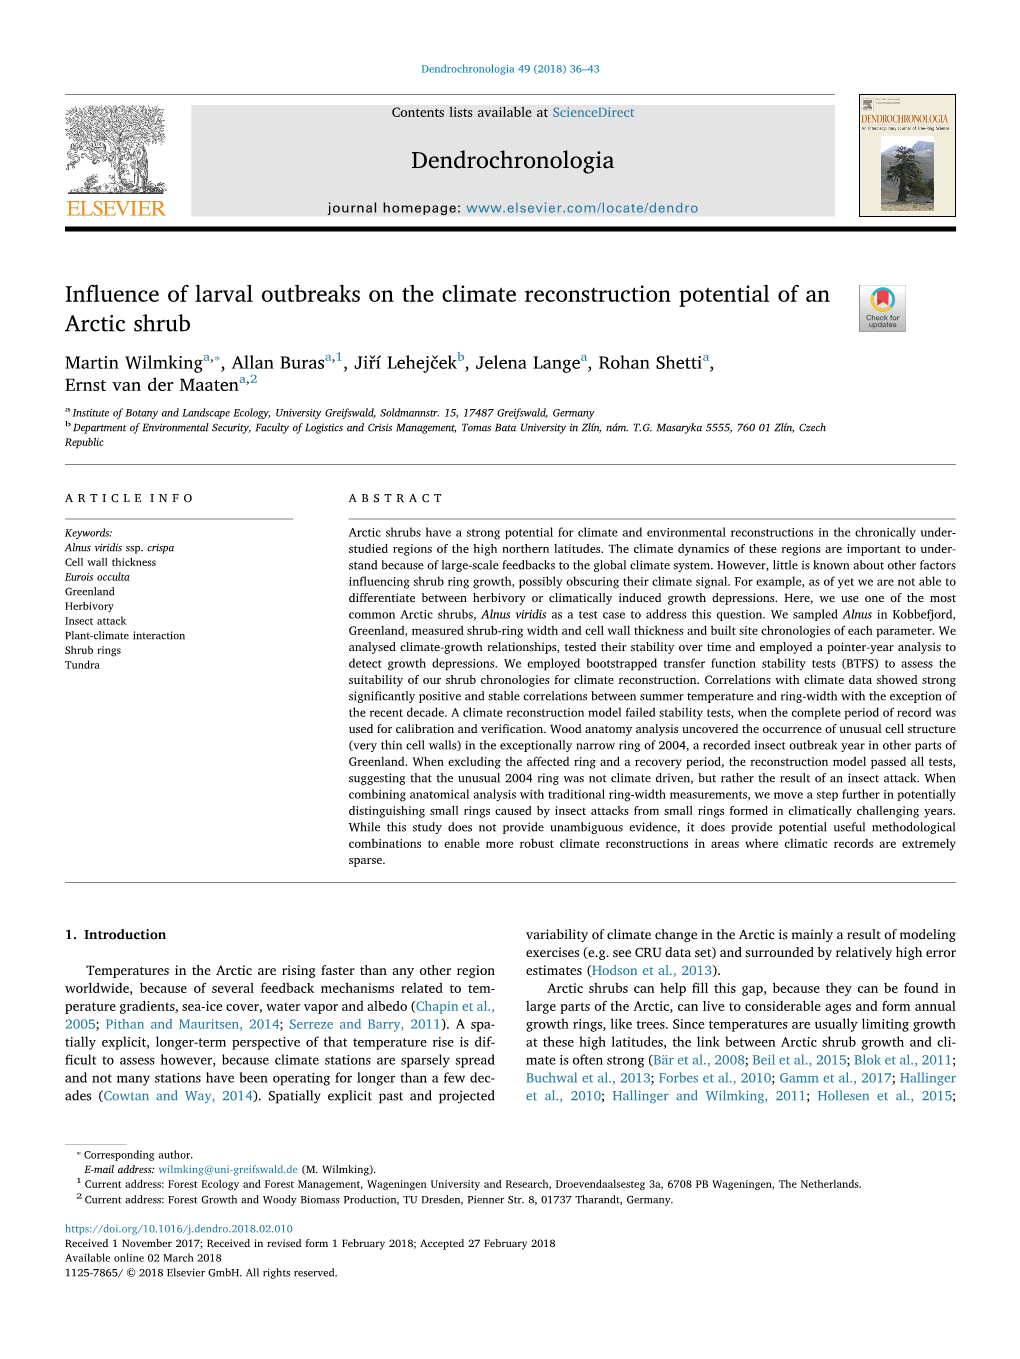 Influence of Larval Outbreaks on the Climate Reconstruction Potential Of